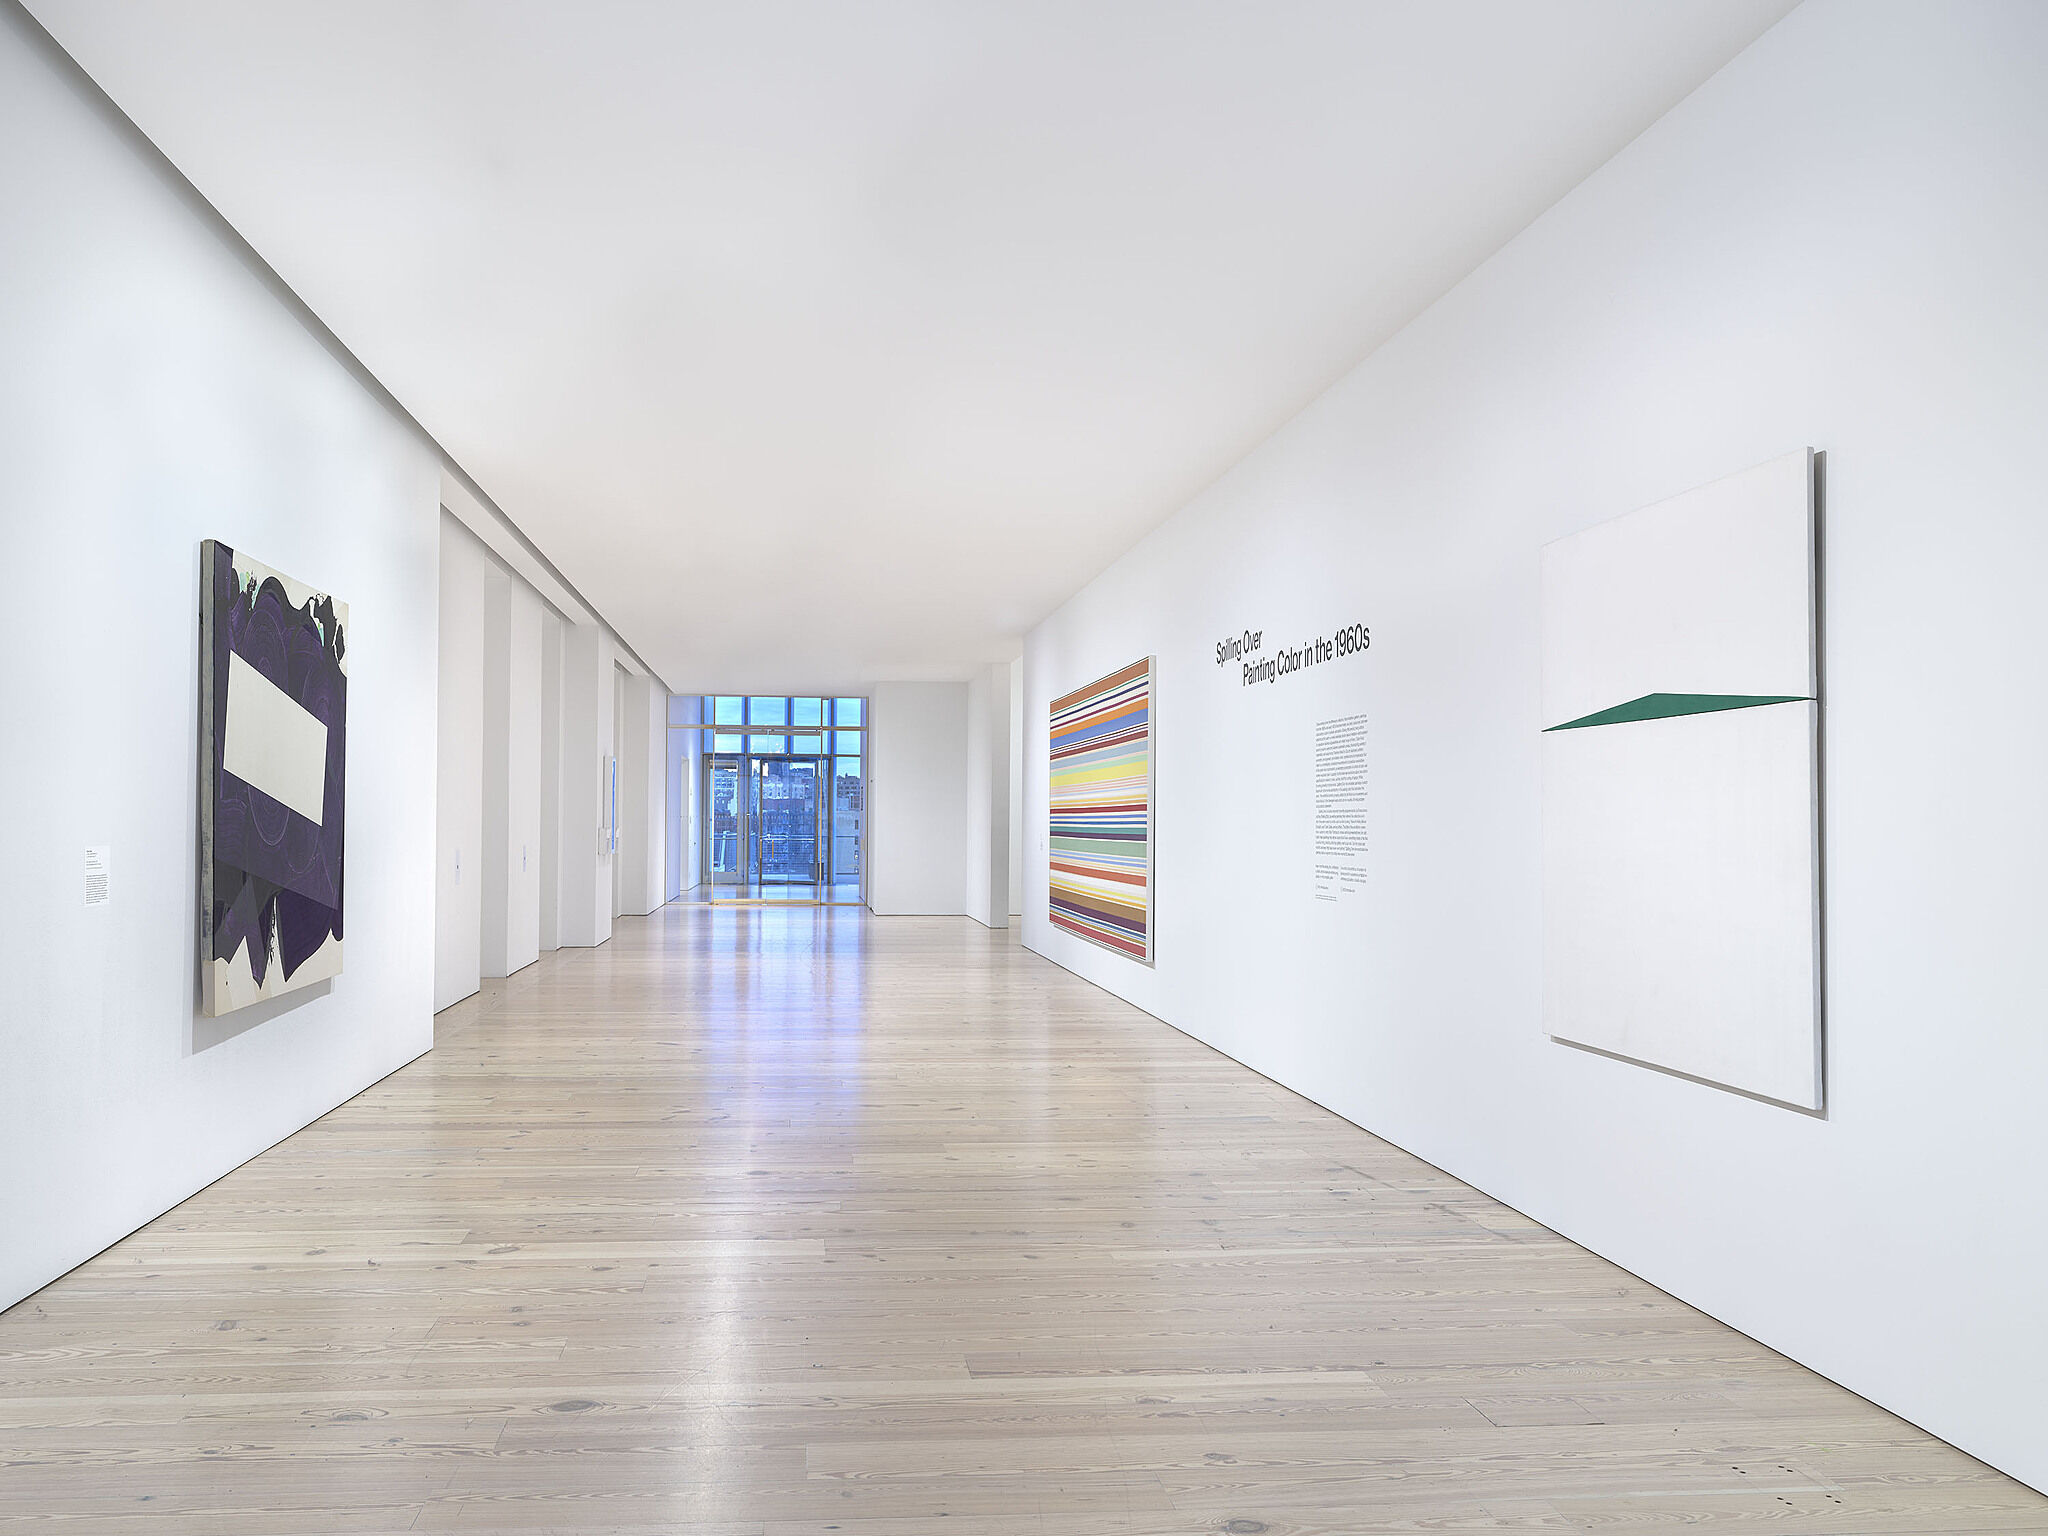 An image of the Whitney galleries with paintings on the wall